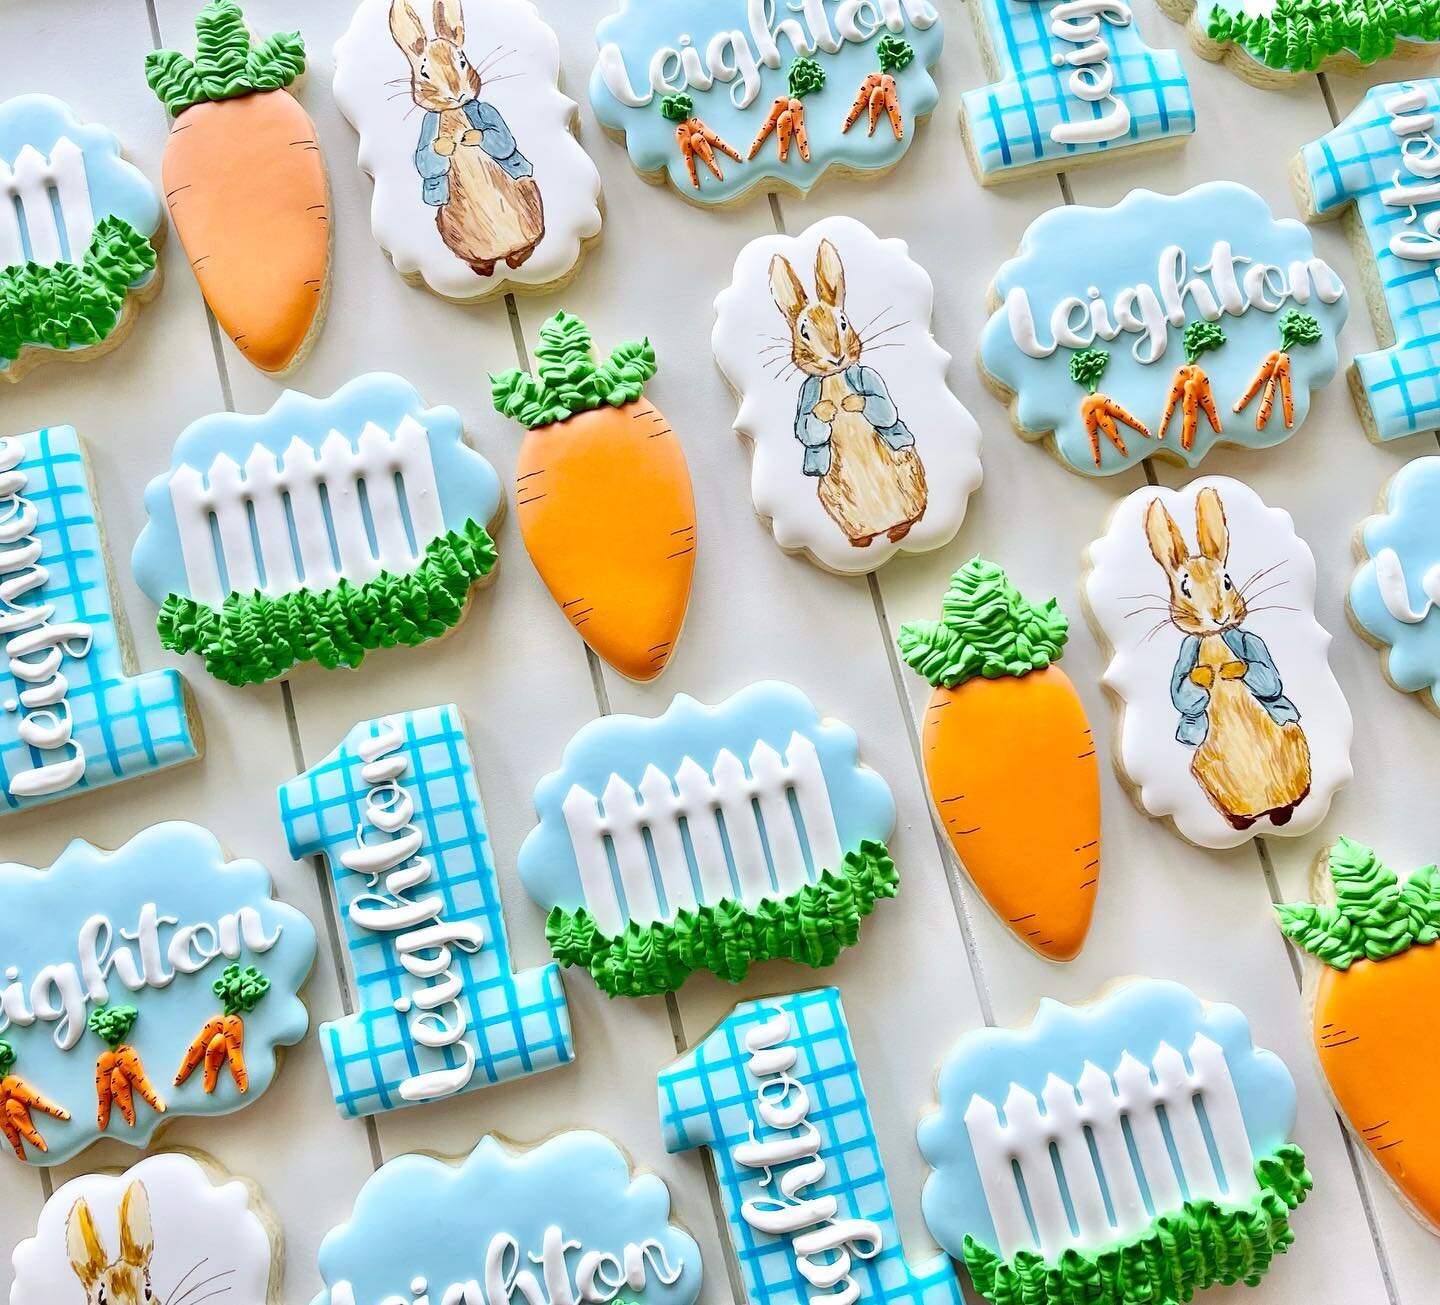 Happy Easter 🐰🐇 🥕
.
.
.
.
.
#happyeaster #easter2022 #peterrabbit #peterrabbitcookies #eastercookies #bunny #easterbunny #bunnycookies #easterbunnycookies #carrots #carrotcookies #firstbirthday #1stbirthday #picketfence #picketfencecookies #tampa 